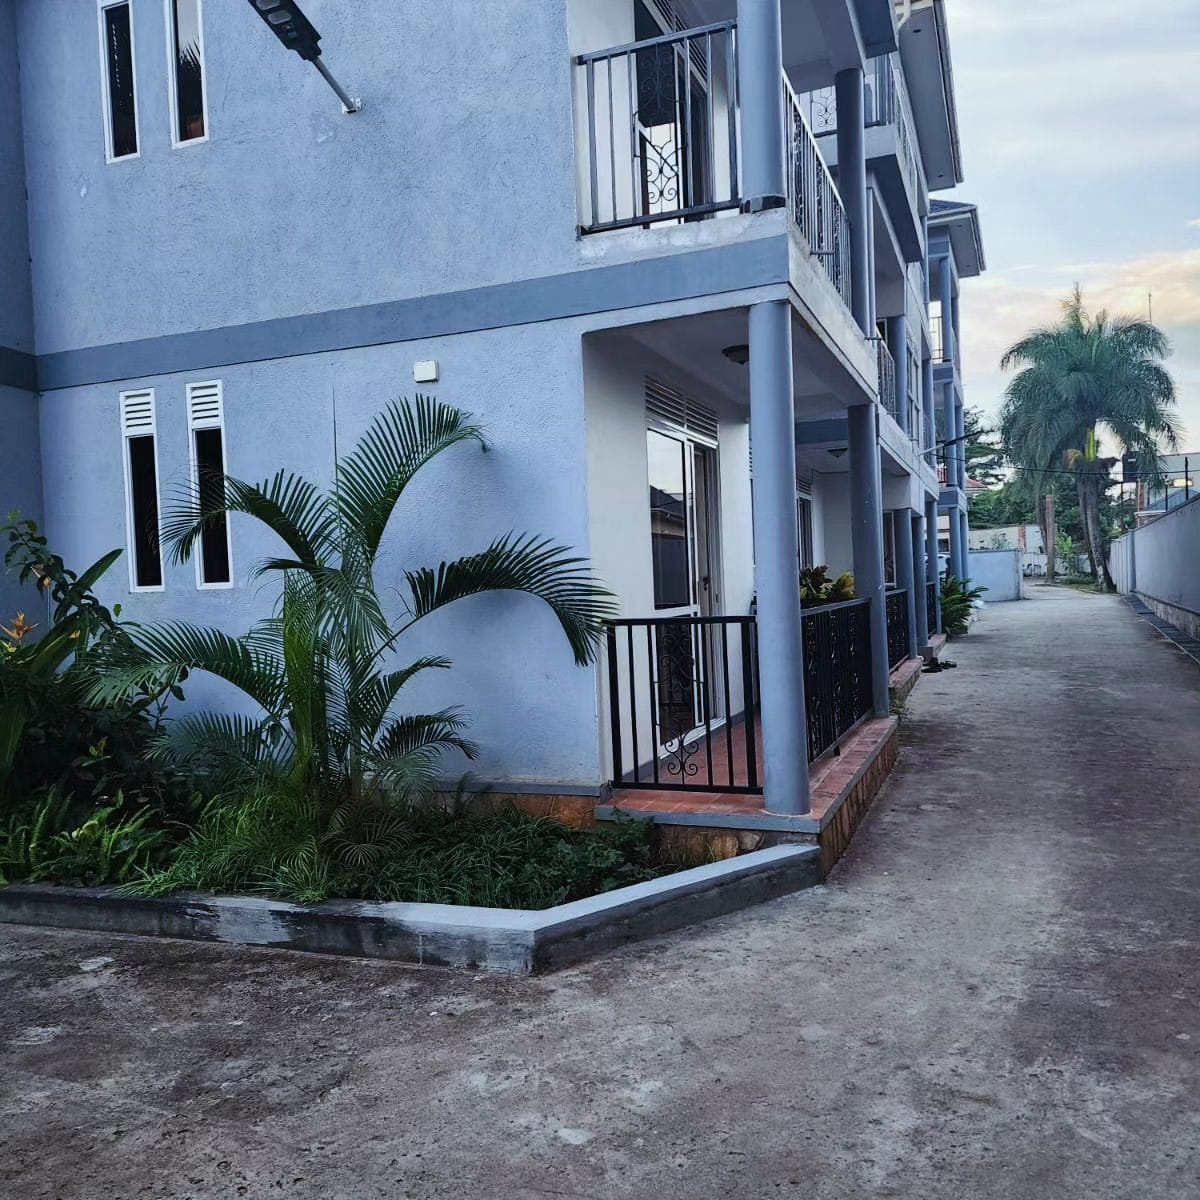 Aster 2 bedrooms-Luthuli bugolobi